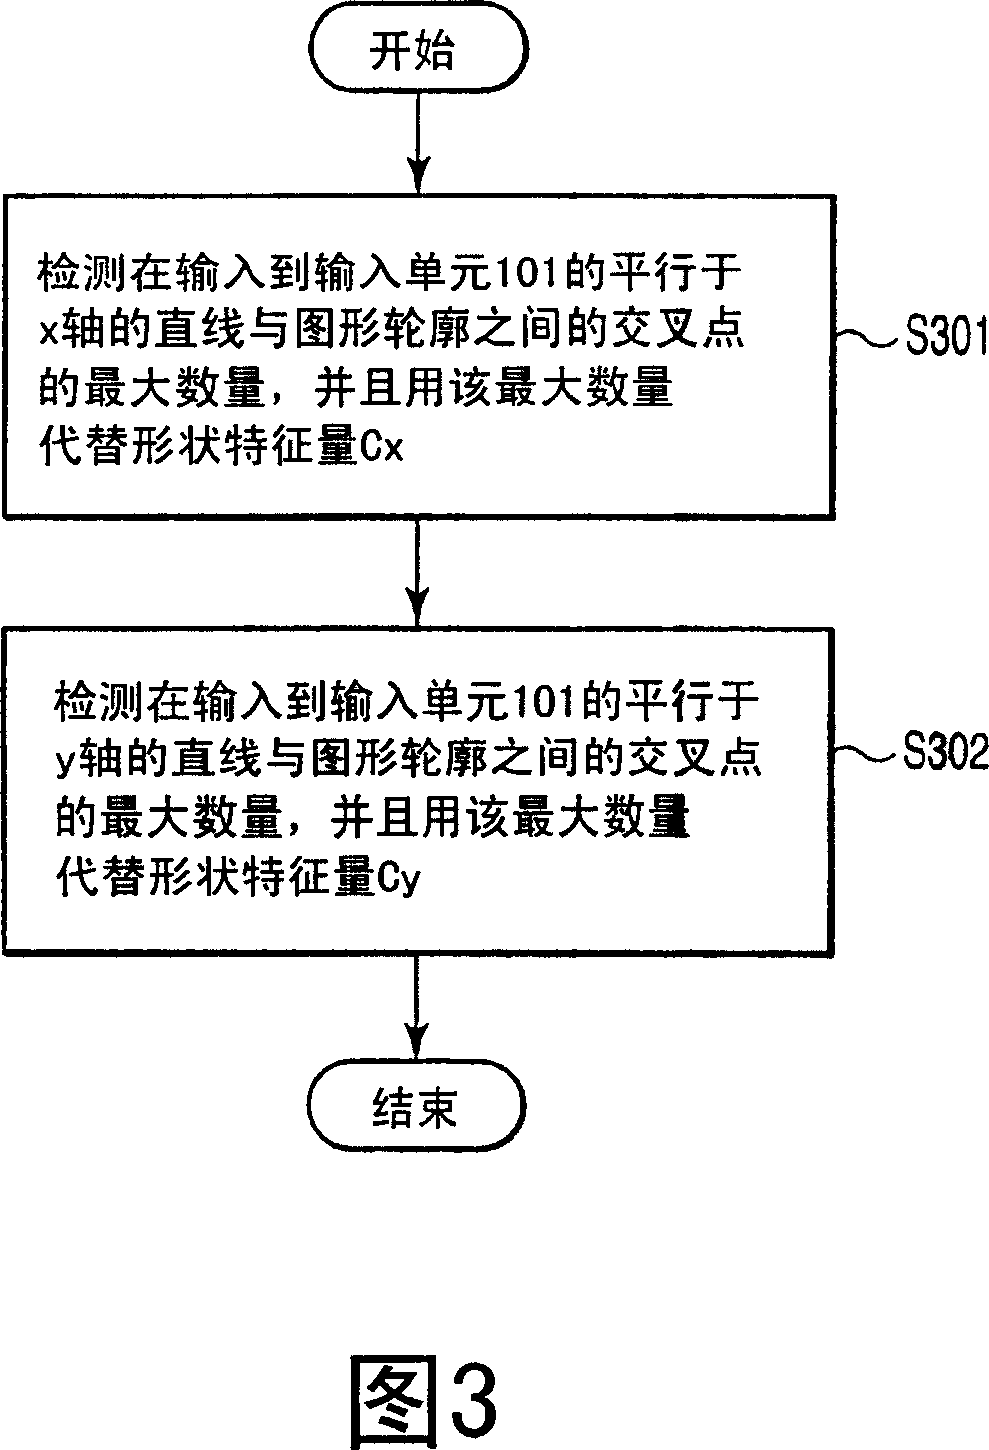 Rendering apparatus and method, and shape data generation apparatus and method